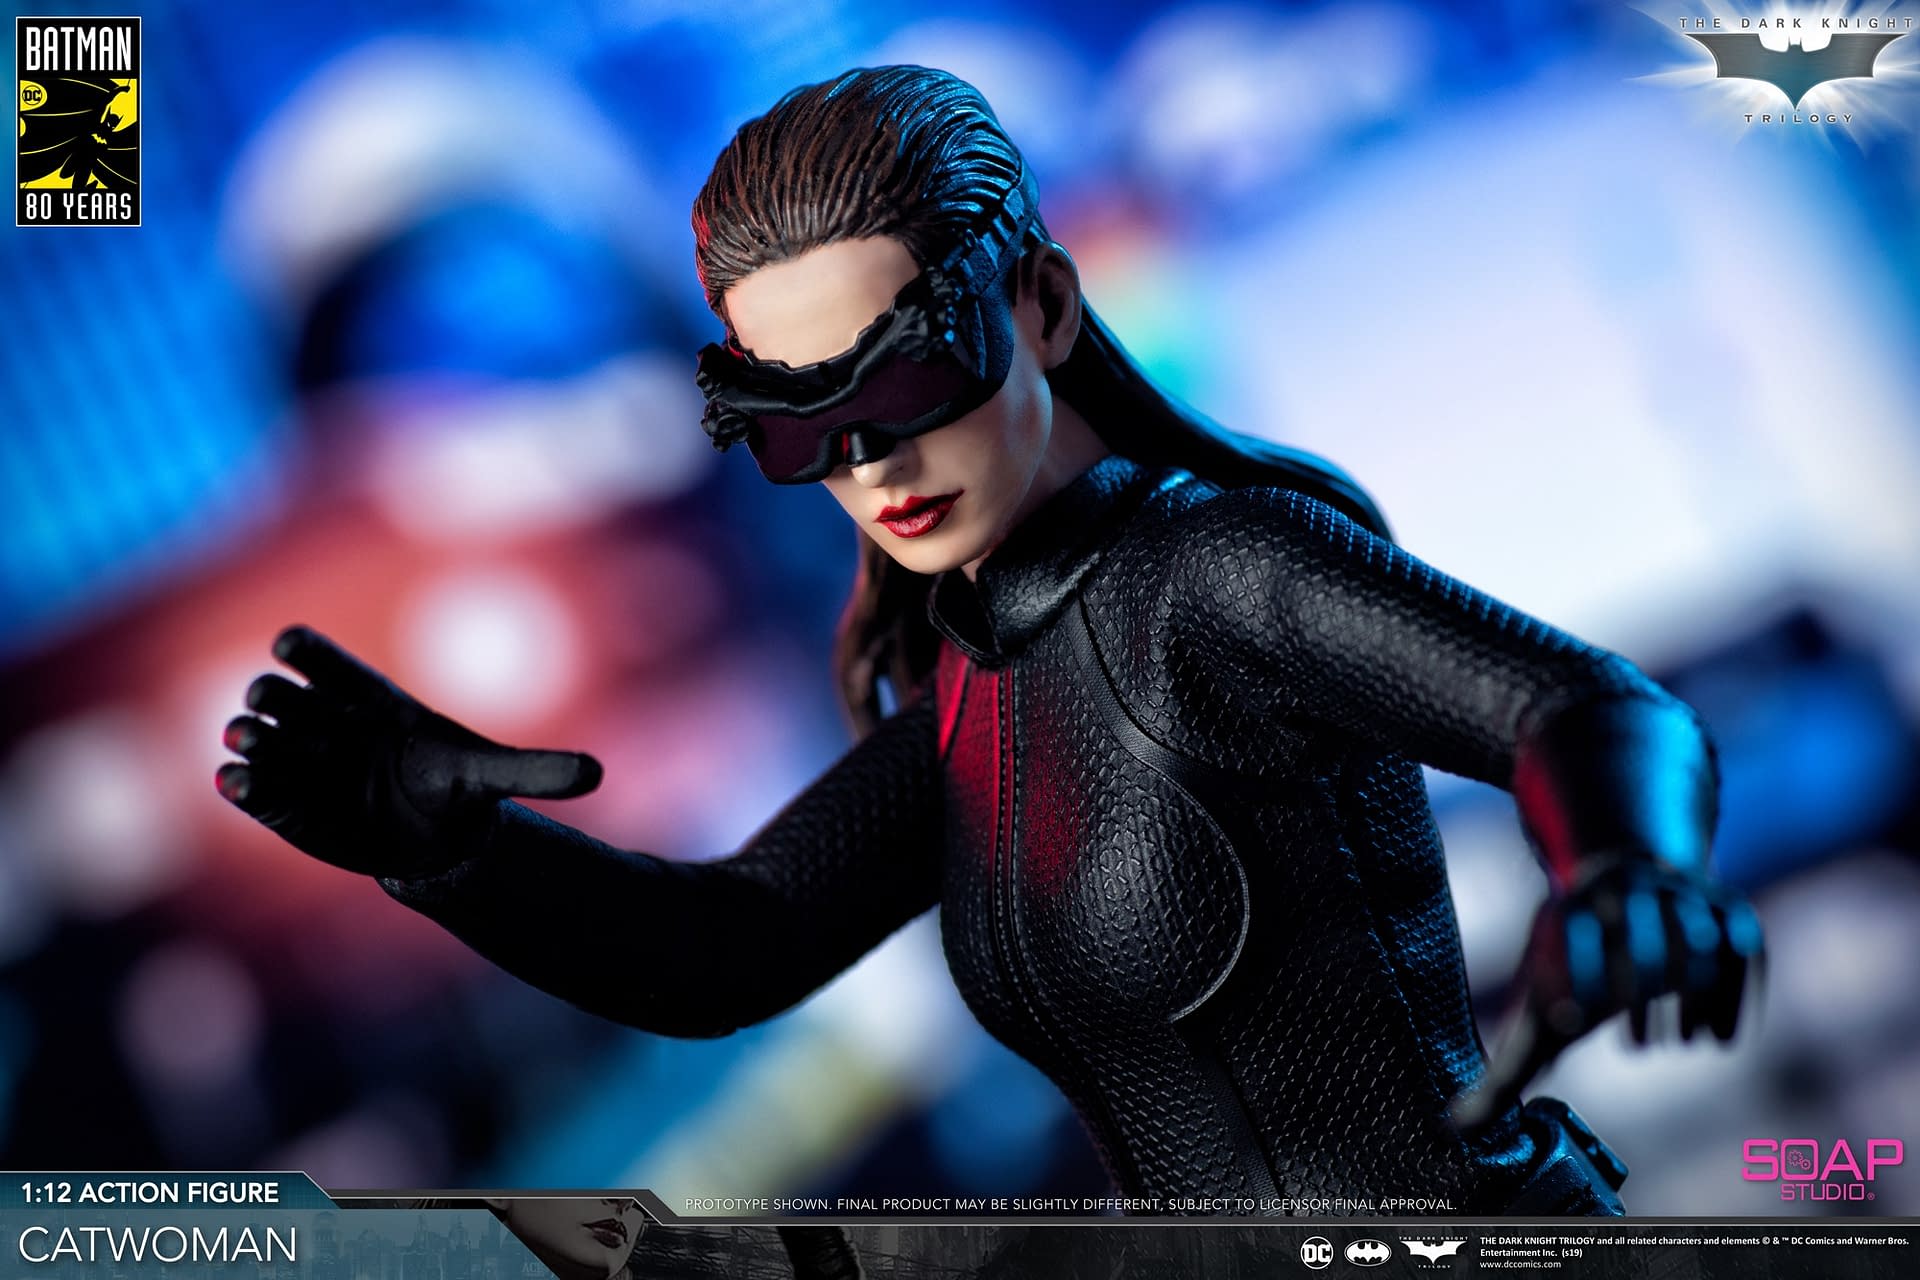 Dark Knight Trilogy Catwoman Gets New Figure from Soap Studio